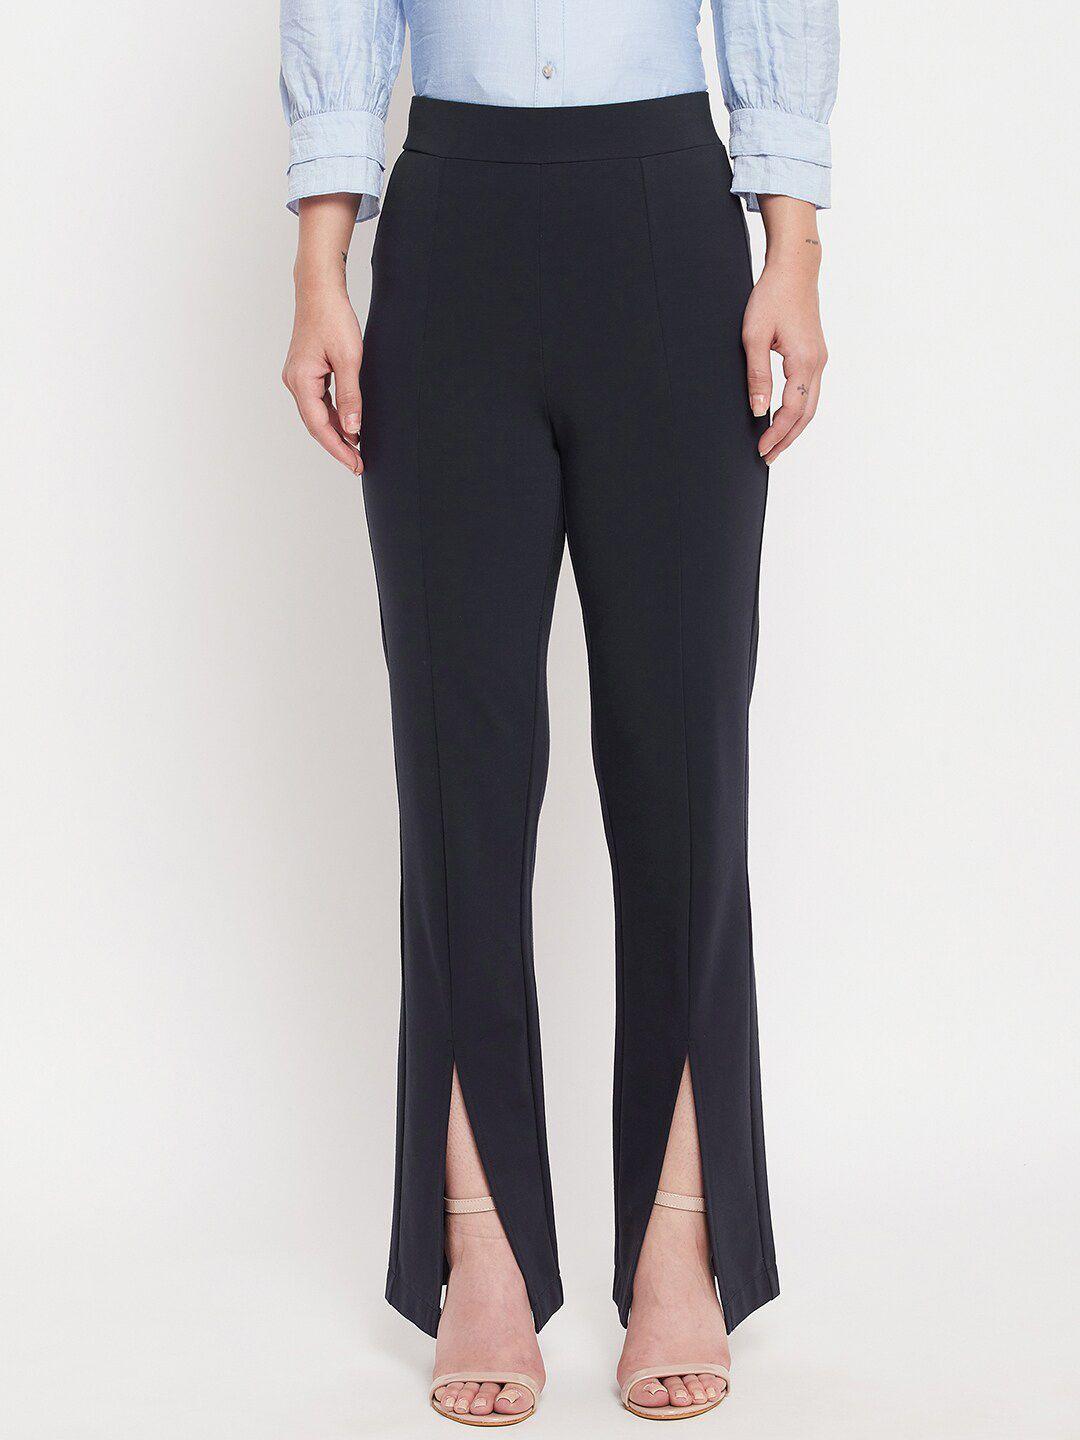 madame women navy blue jeggings with slits